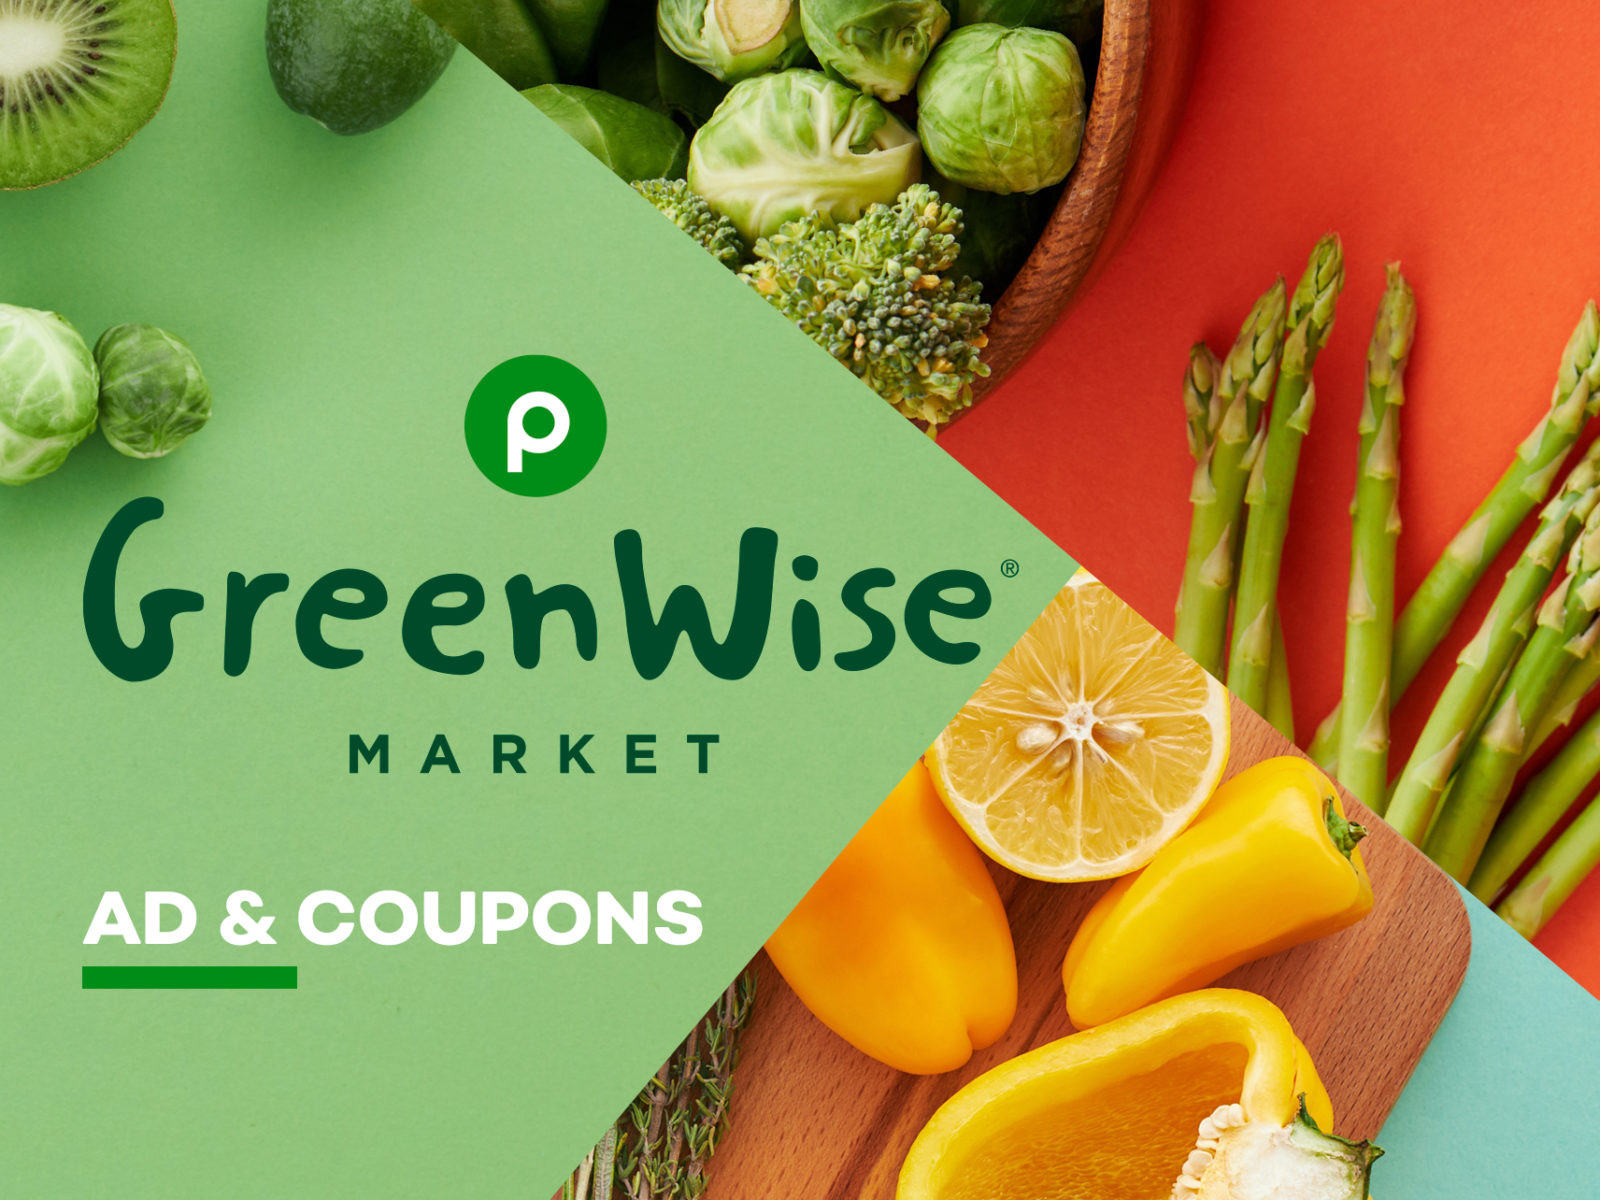 Publix GreenWise Market Ad & Coupons Week Of 12/1 to 12/7 (11/30 to 12/6 For Some)